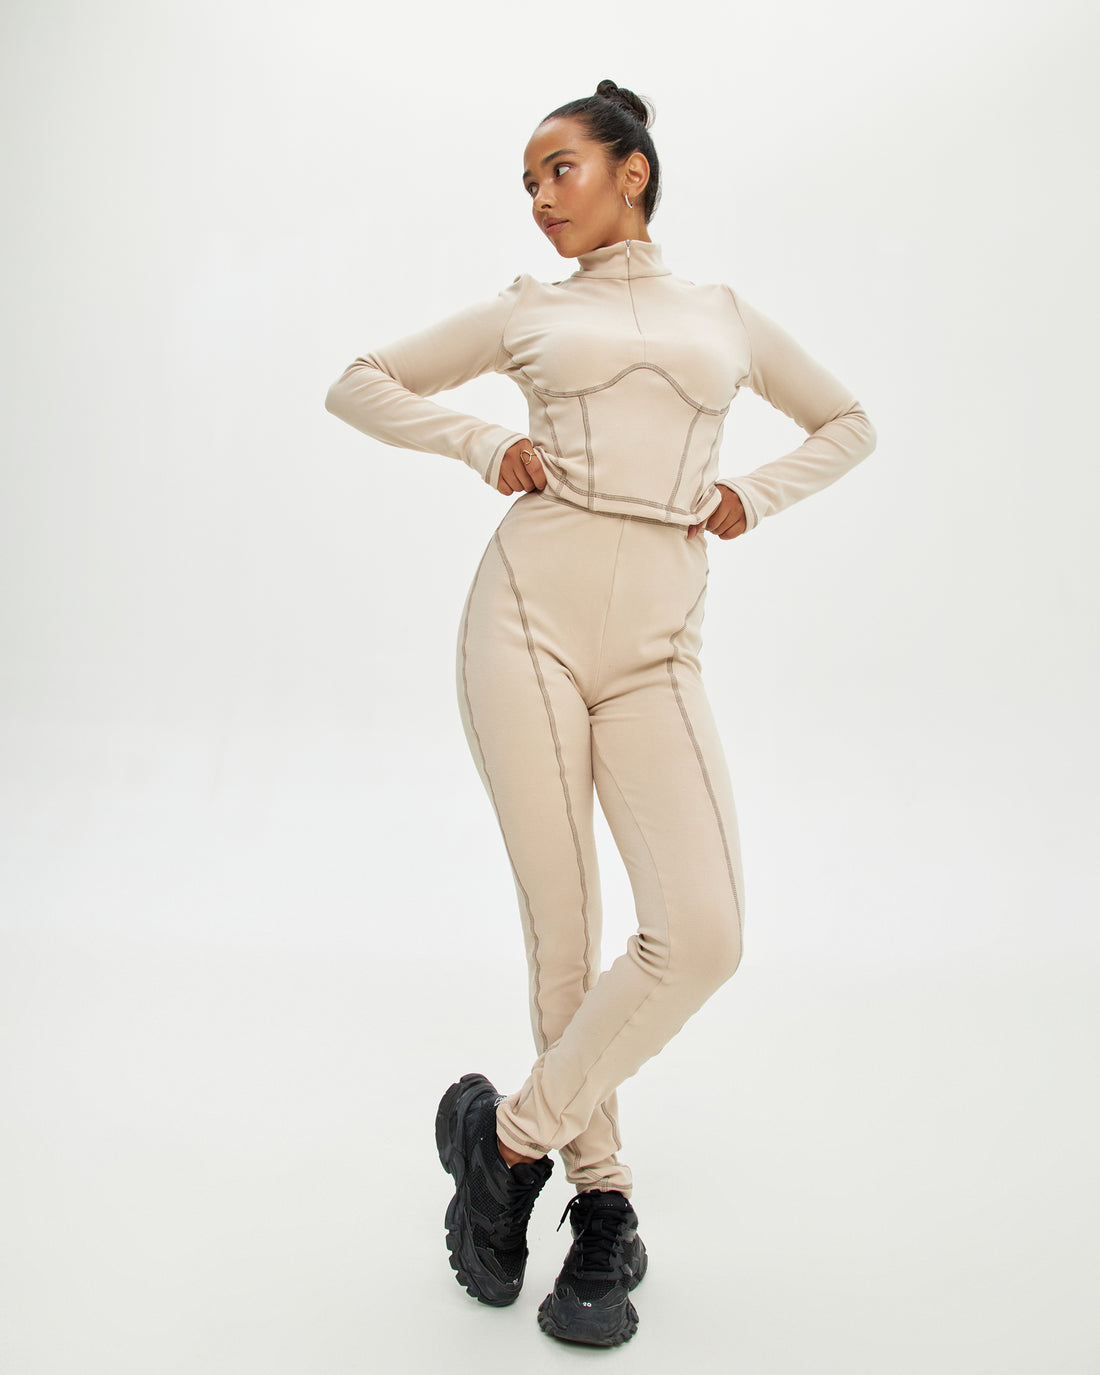 Womens base layer clothing - Beige two piece set long johns - Womens thermal tops